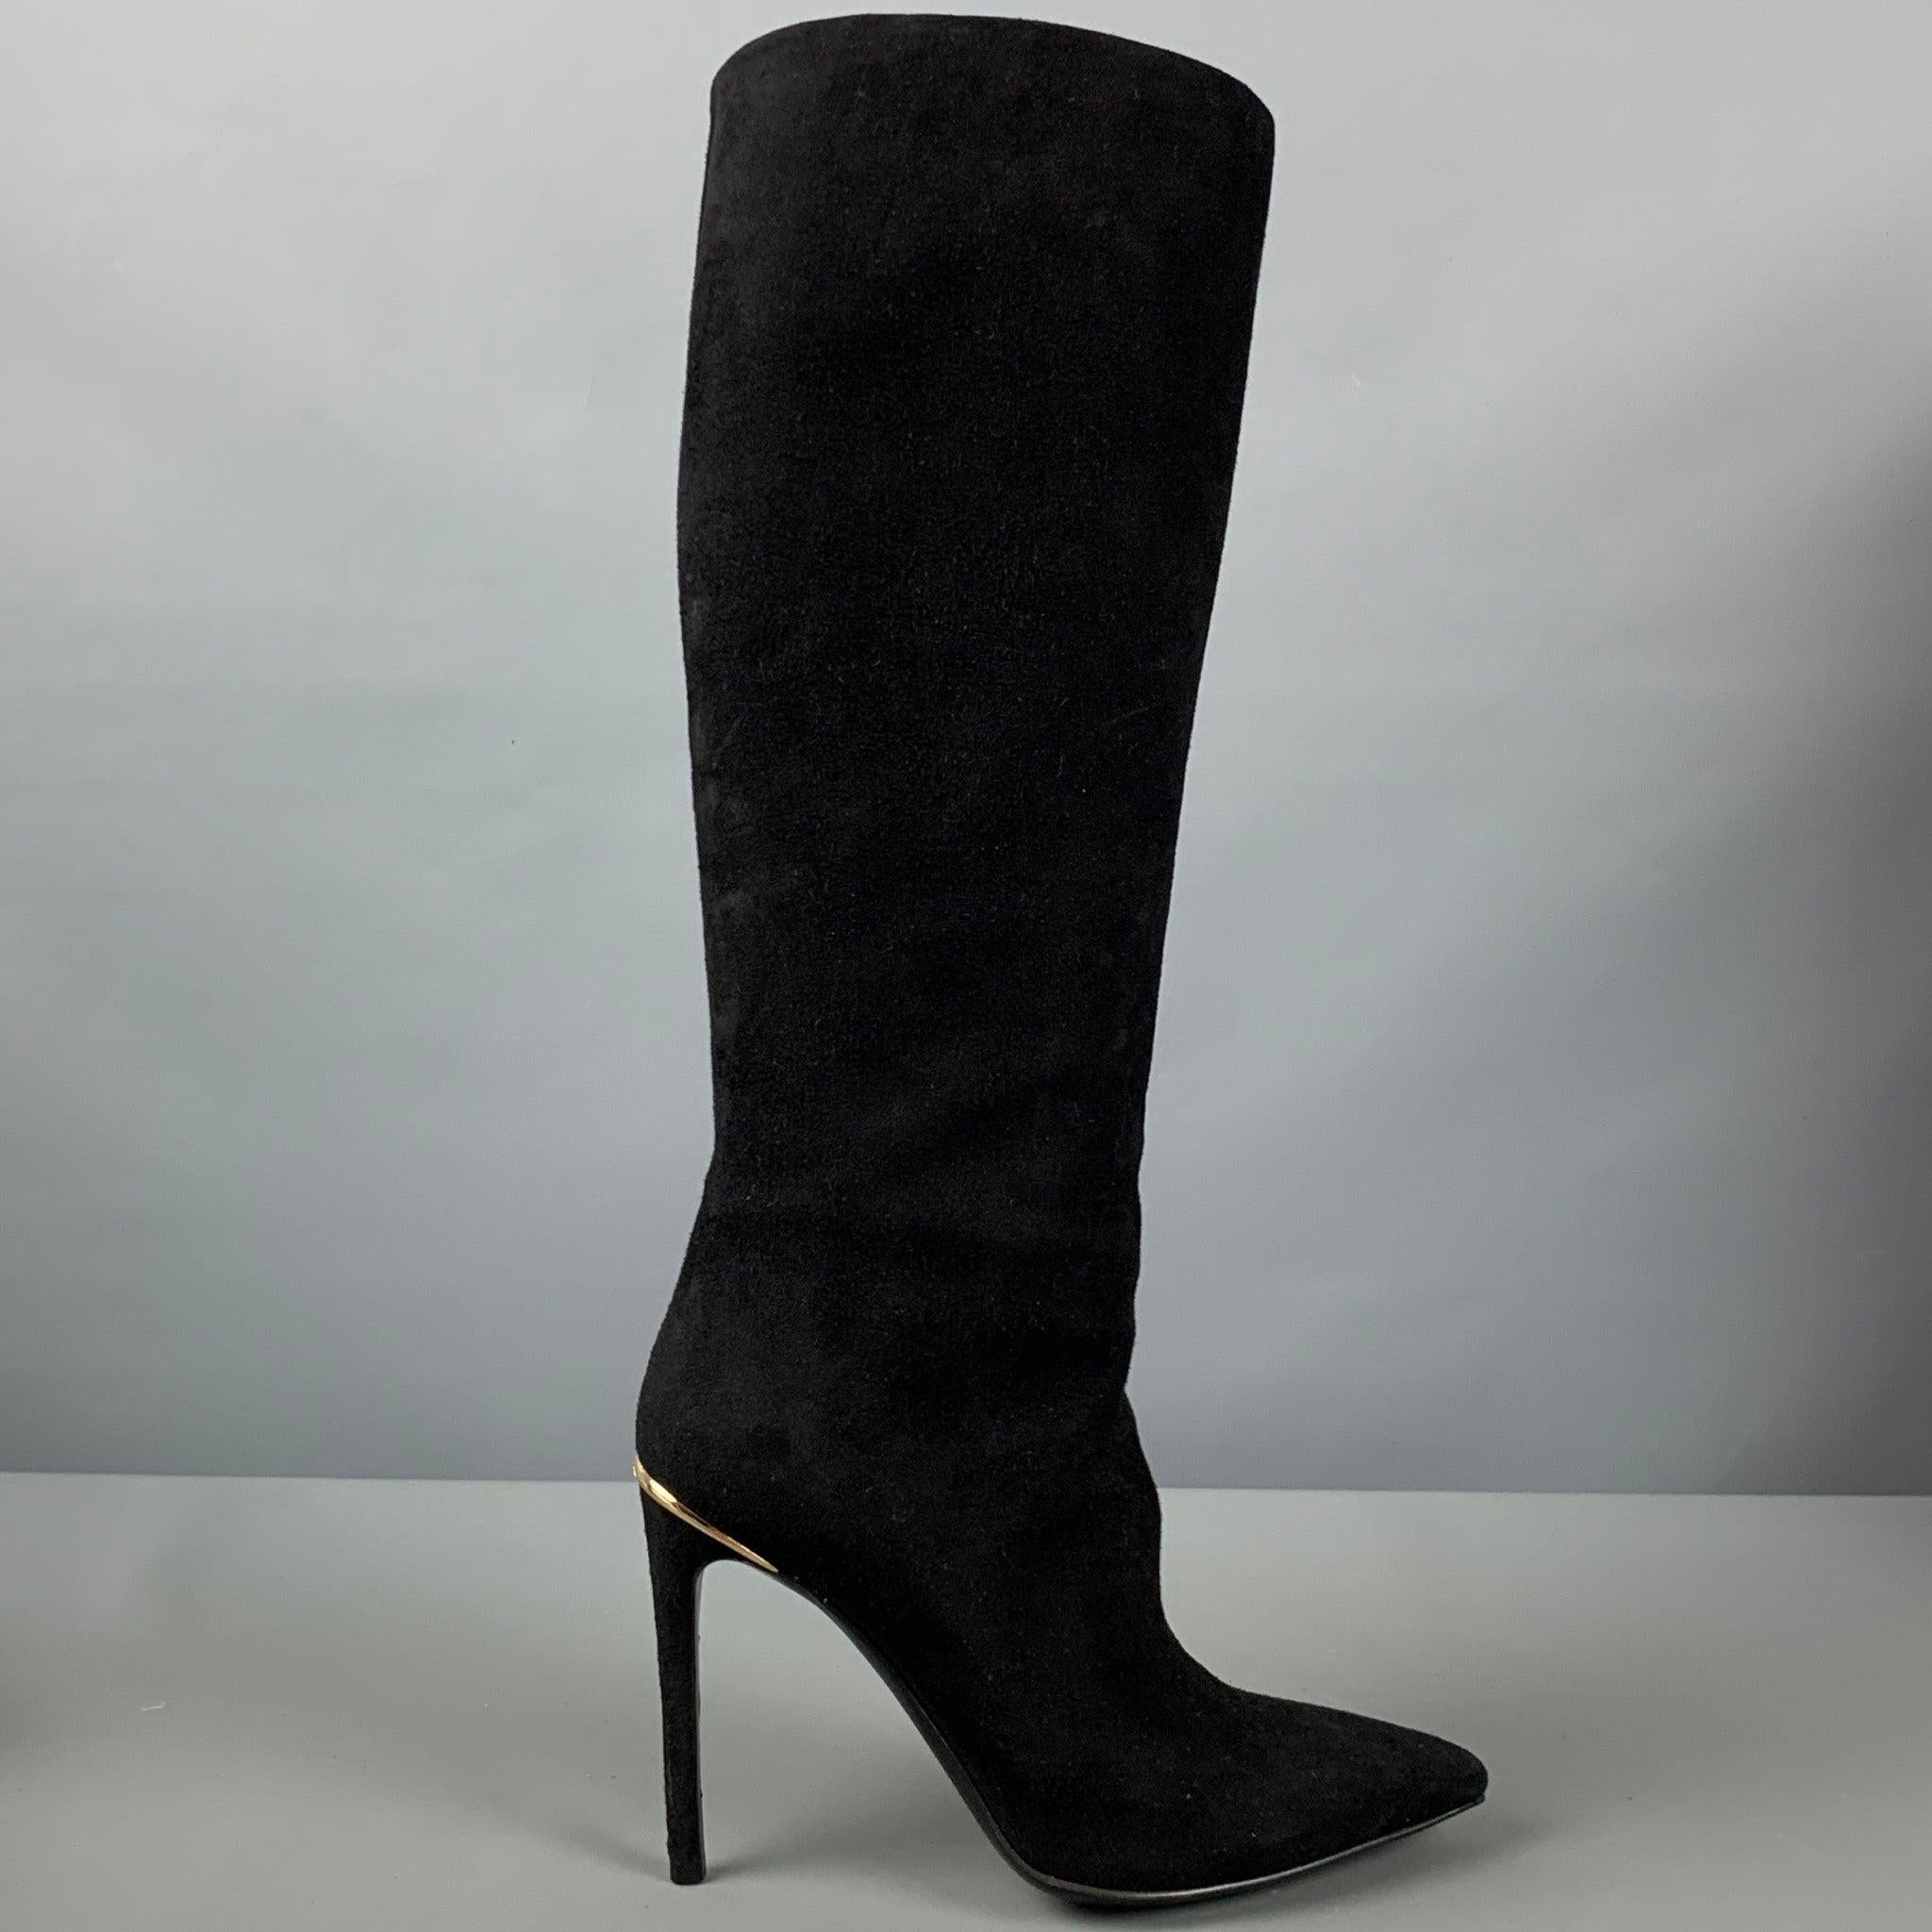 LOUIS VUITTON boots in a black suede featuring a knee high pull on style, gold tone heel detail, and pointed toe. Made in Italy.Very Good Pre-Owned Condition. 

Marked:   IT 37 

Measurements: 
  Length: 8.5 inches Width: 3 inches Height: 18.5